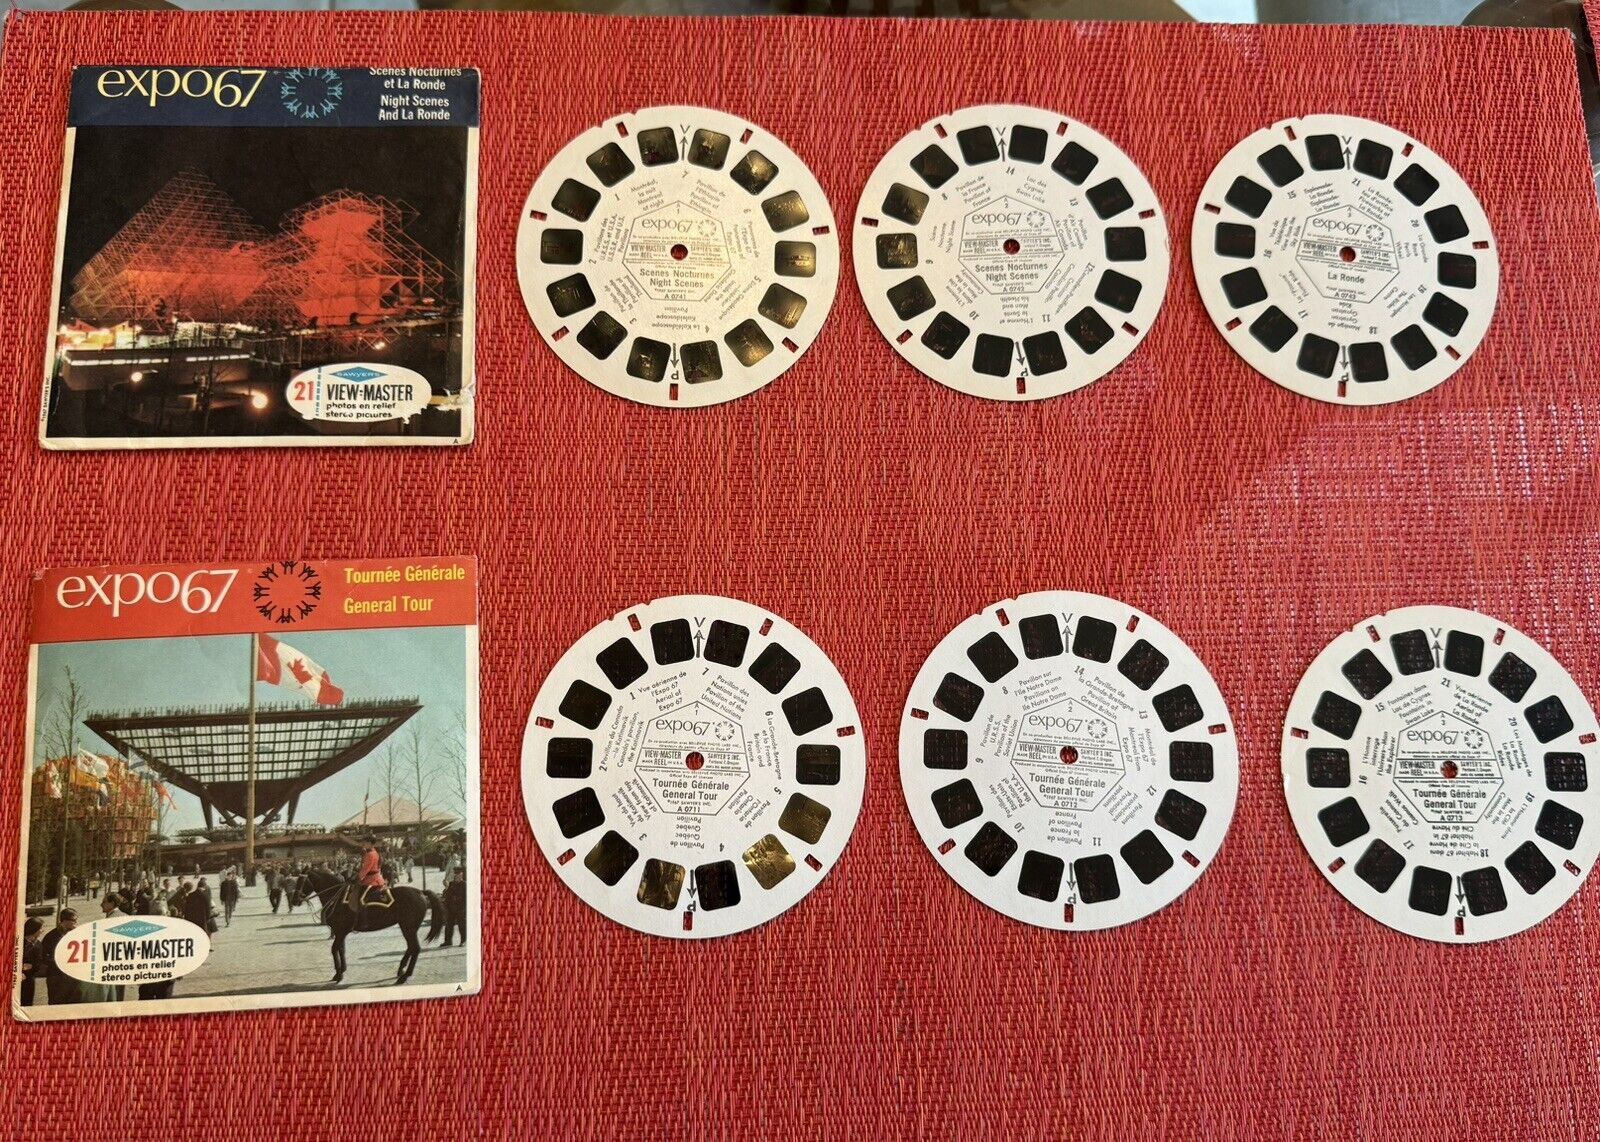 Vintage Viewmaster Reels Expo 67 Montreal